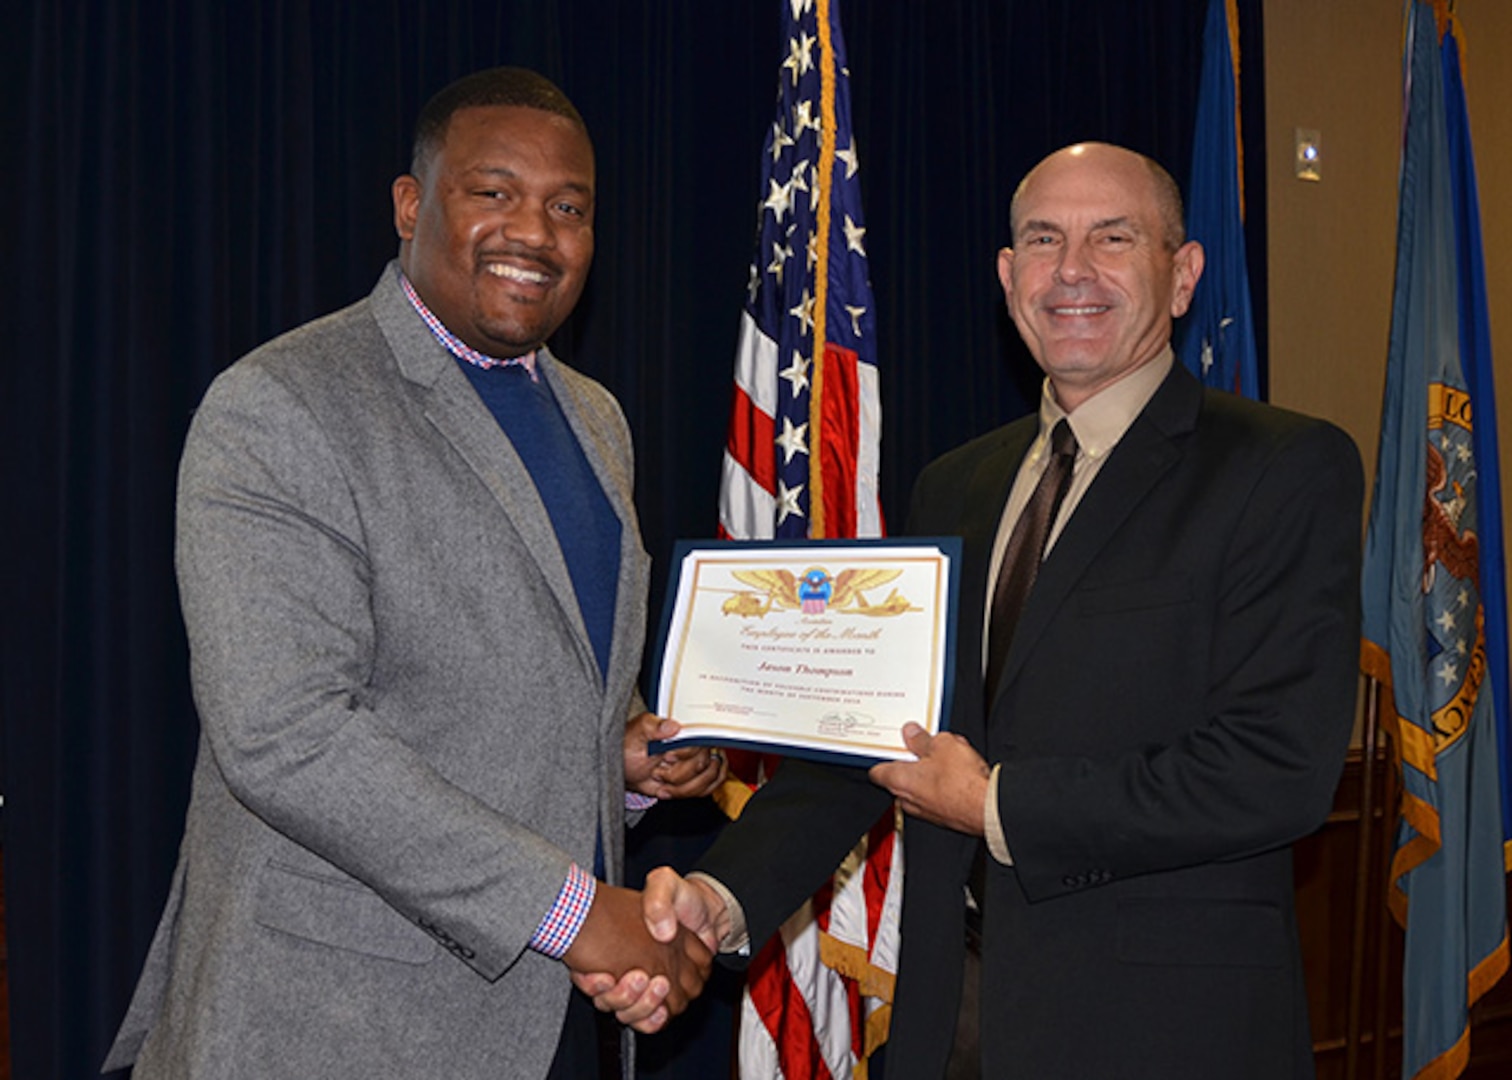 Defense Logistics Agency Aviation employee Jason Thompson receives certificate honoring his selection as the September 2016 Employee of the Month from DLA Aviation Deputy Commander Charlie Lillie Dec. 15, 2016 in a ceremony held in Richmond, Virginia. Thompson is a procurement analyst in the Procurement Process Support Directorate.